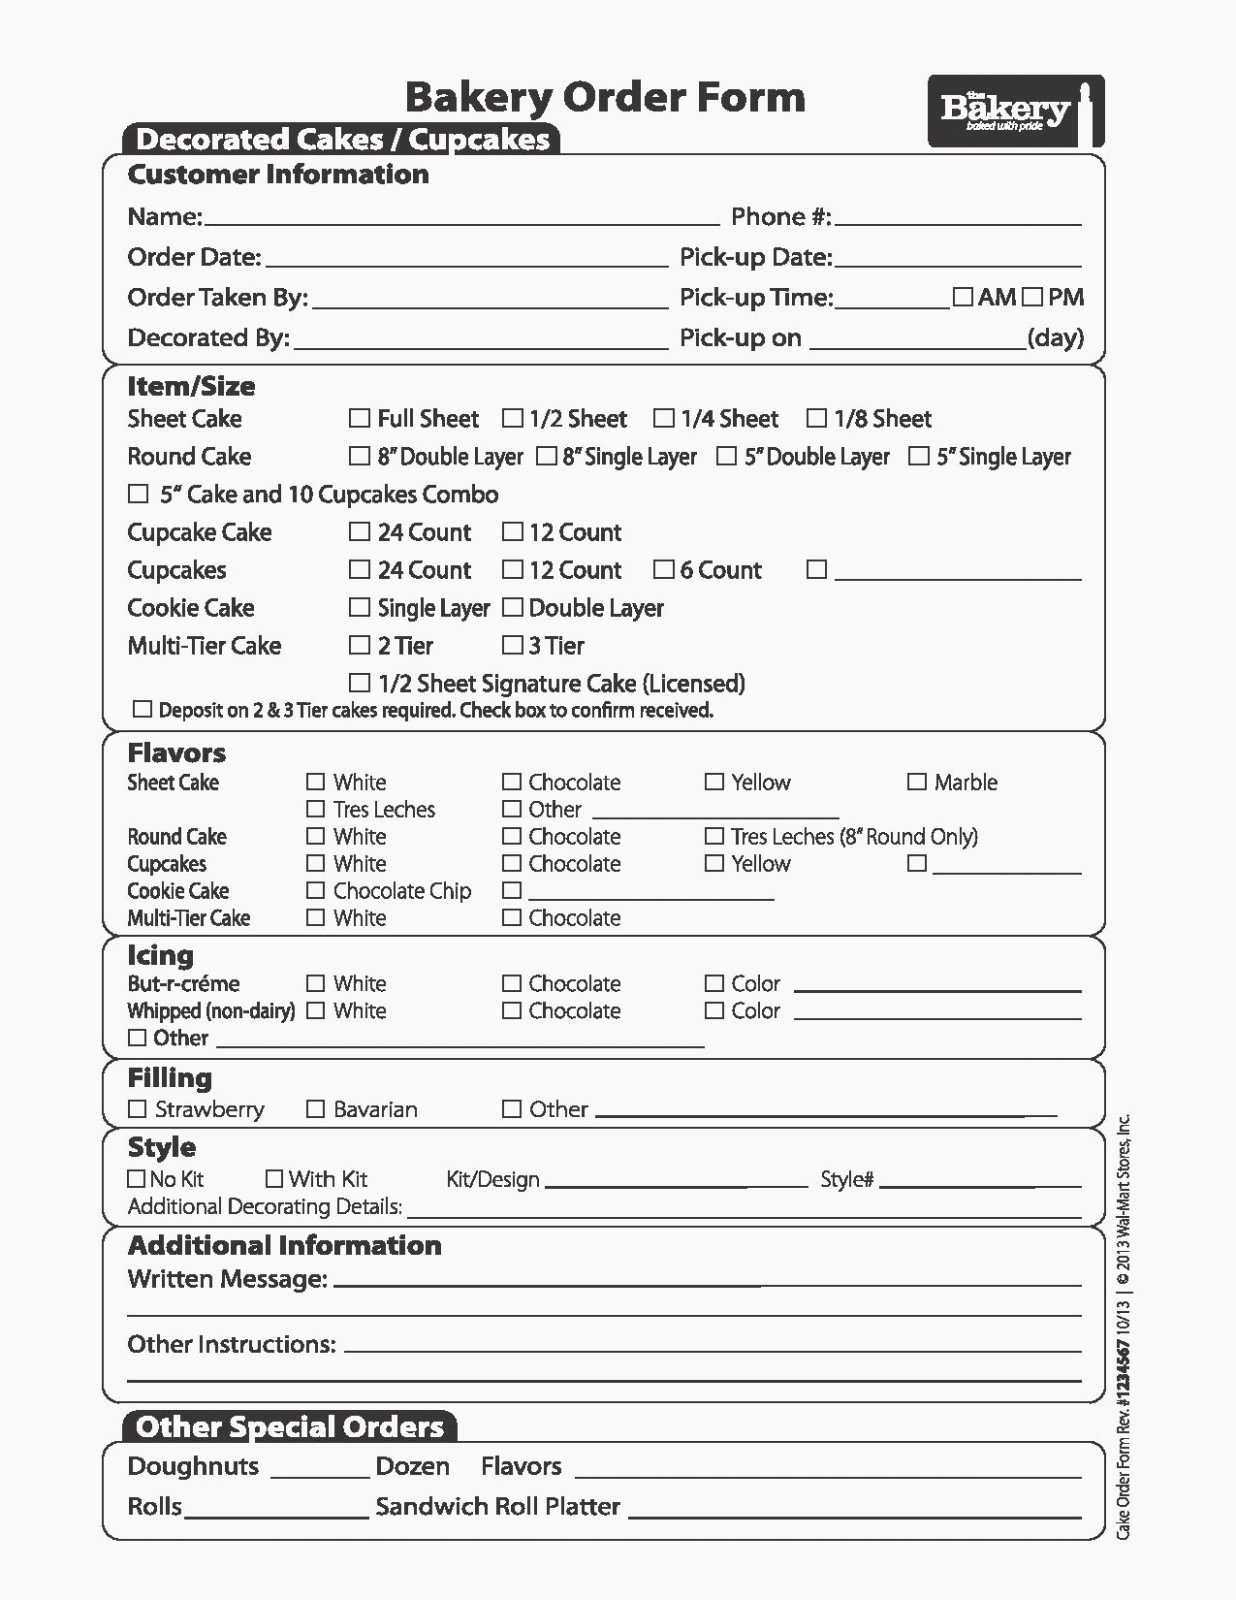 Bakery order forms Template Awesome How You Can attend Baking